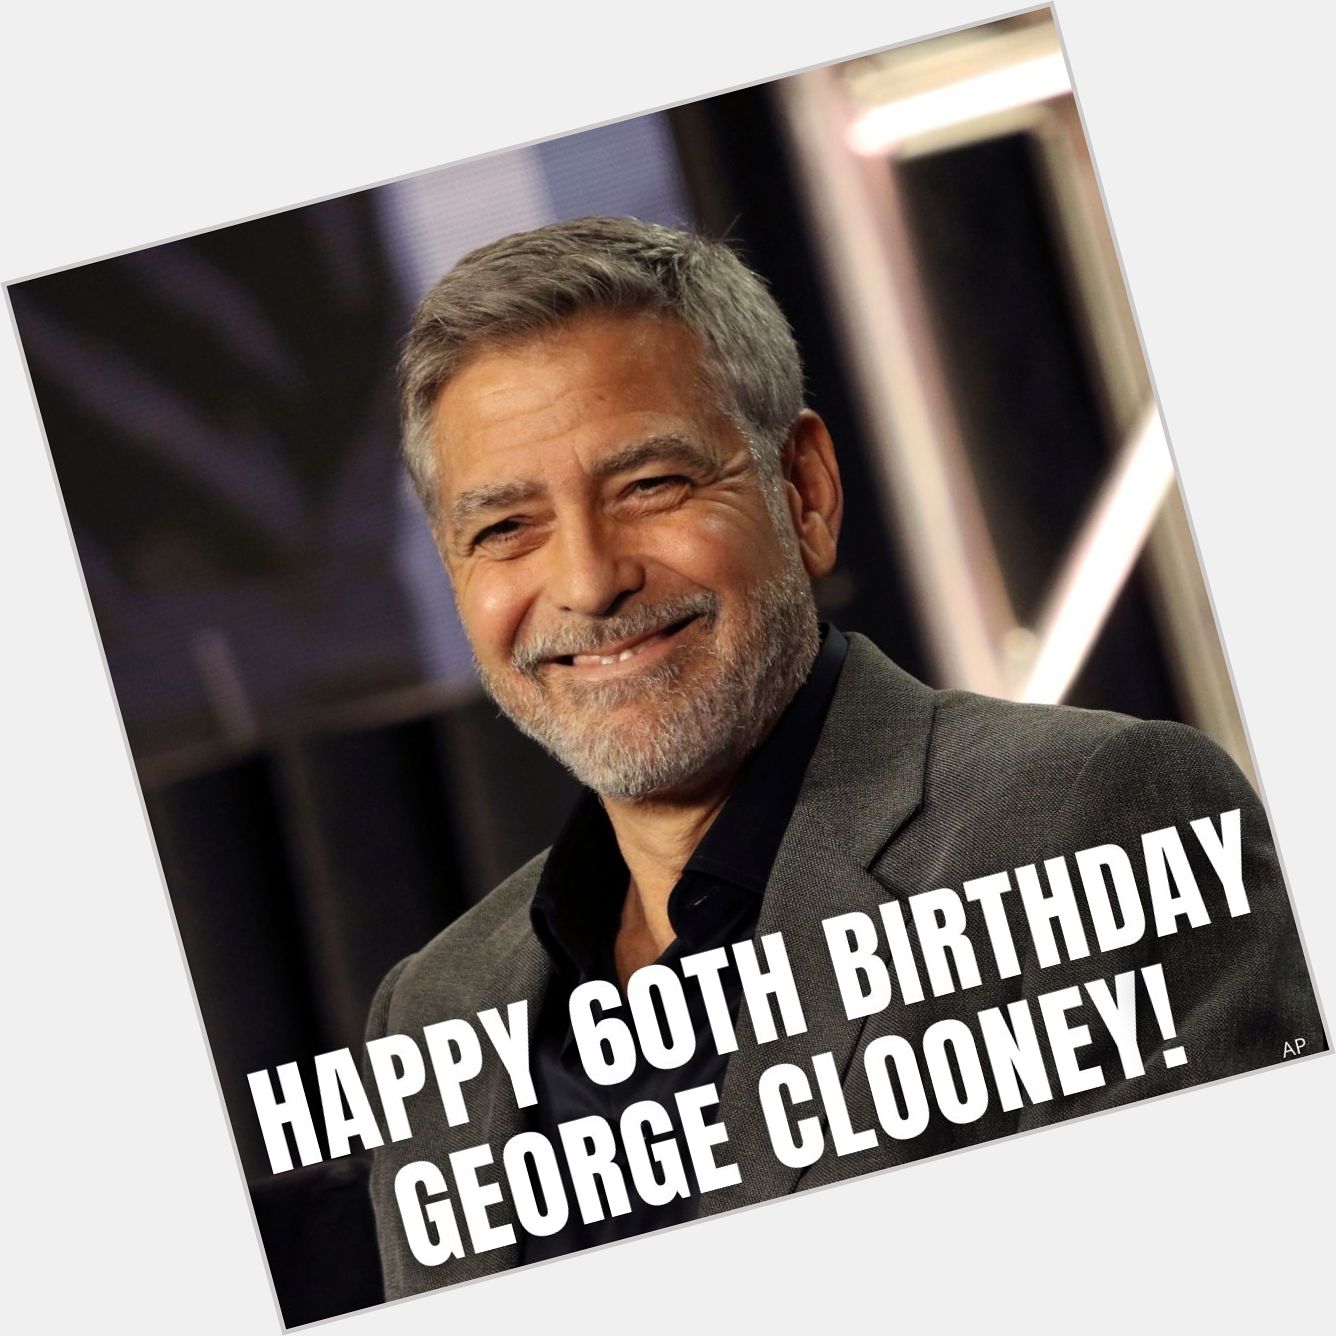 Happy birthday to the Kentucky native, George Clooney! The iconic actor attended Augusta High School, NKU, and UC. 